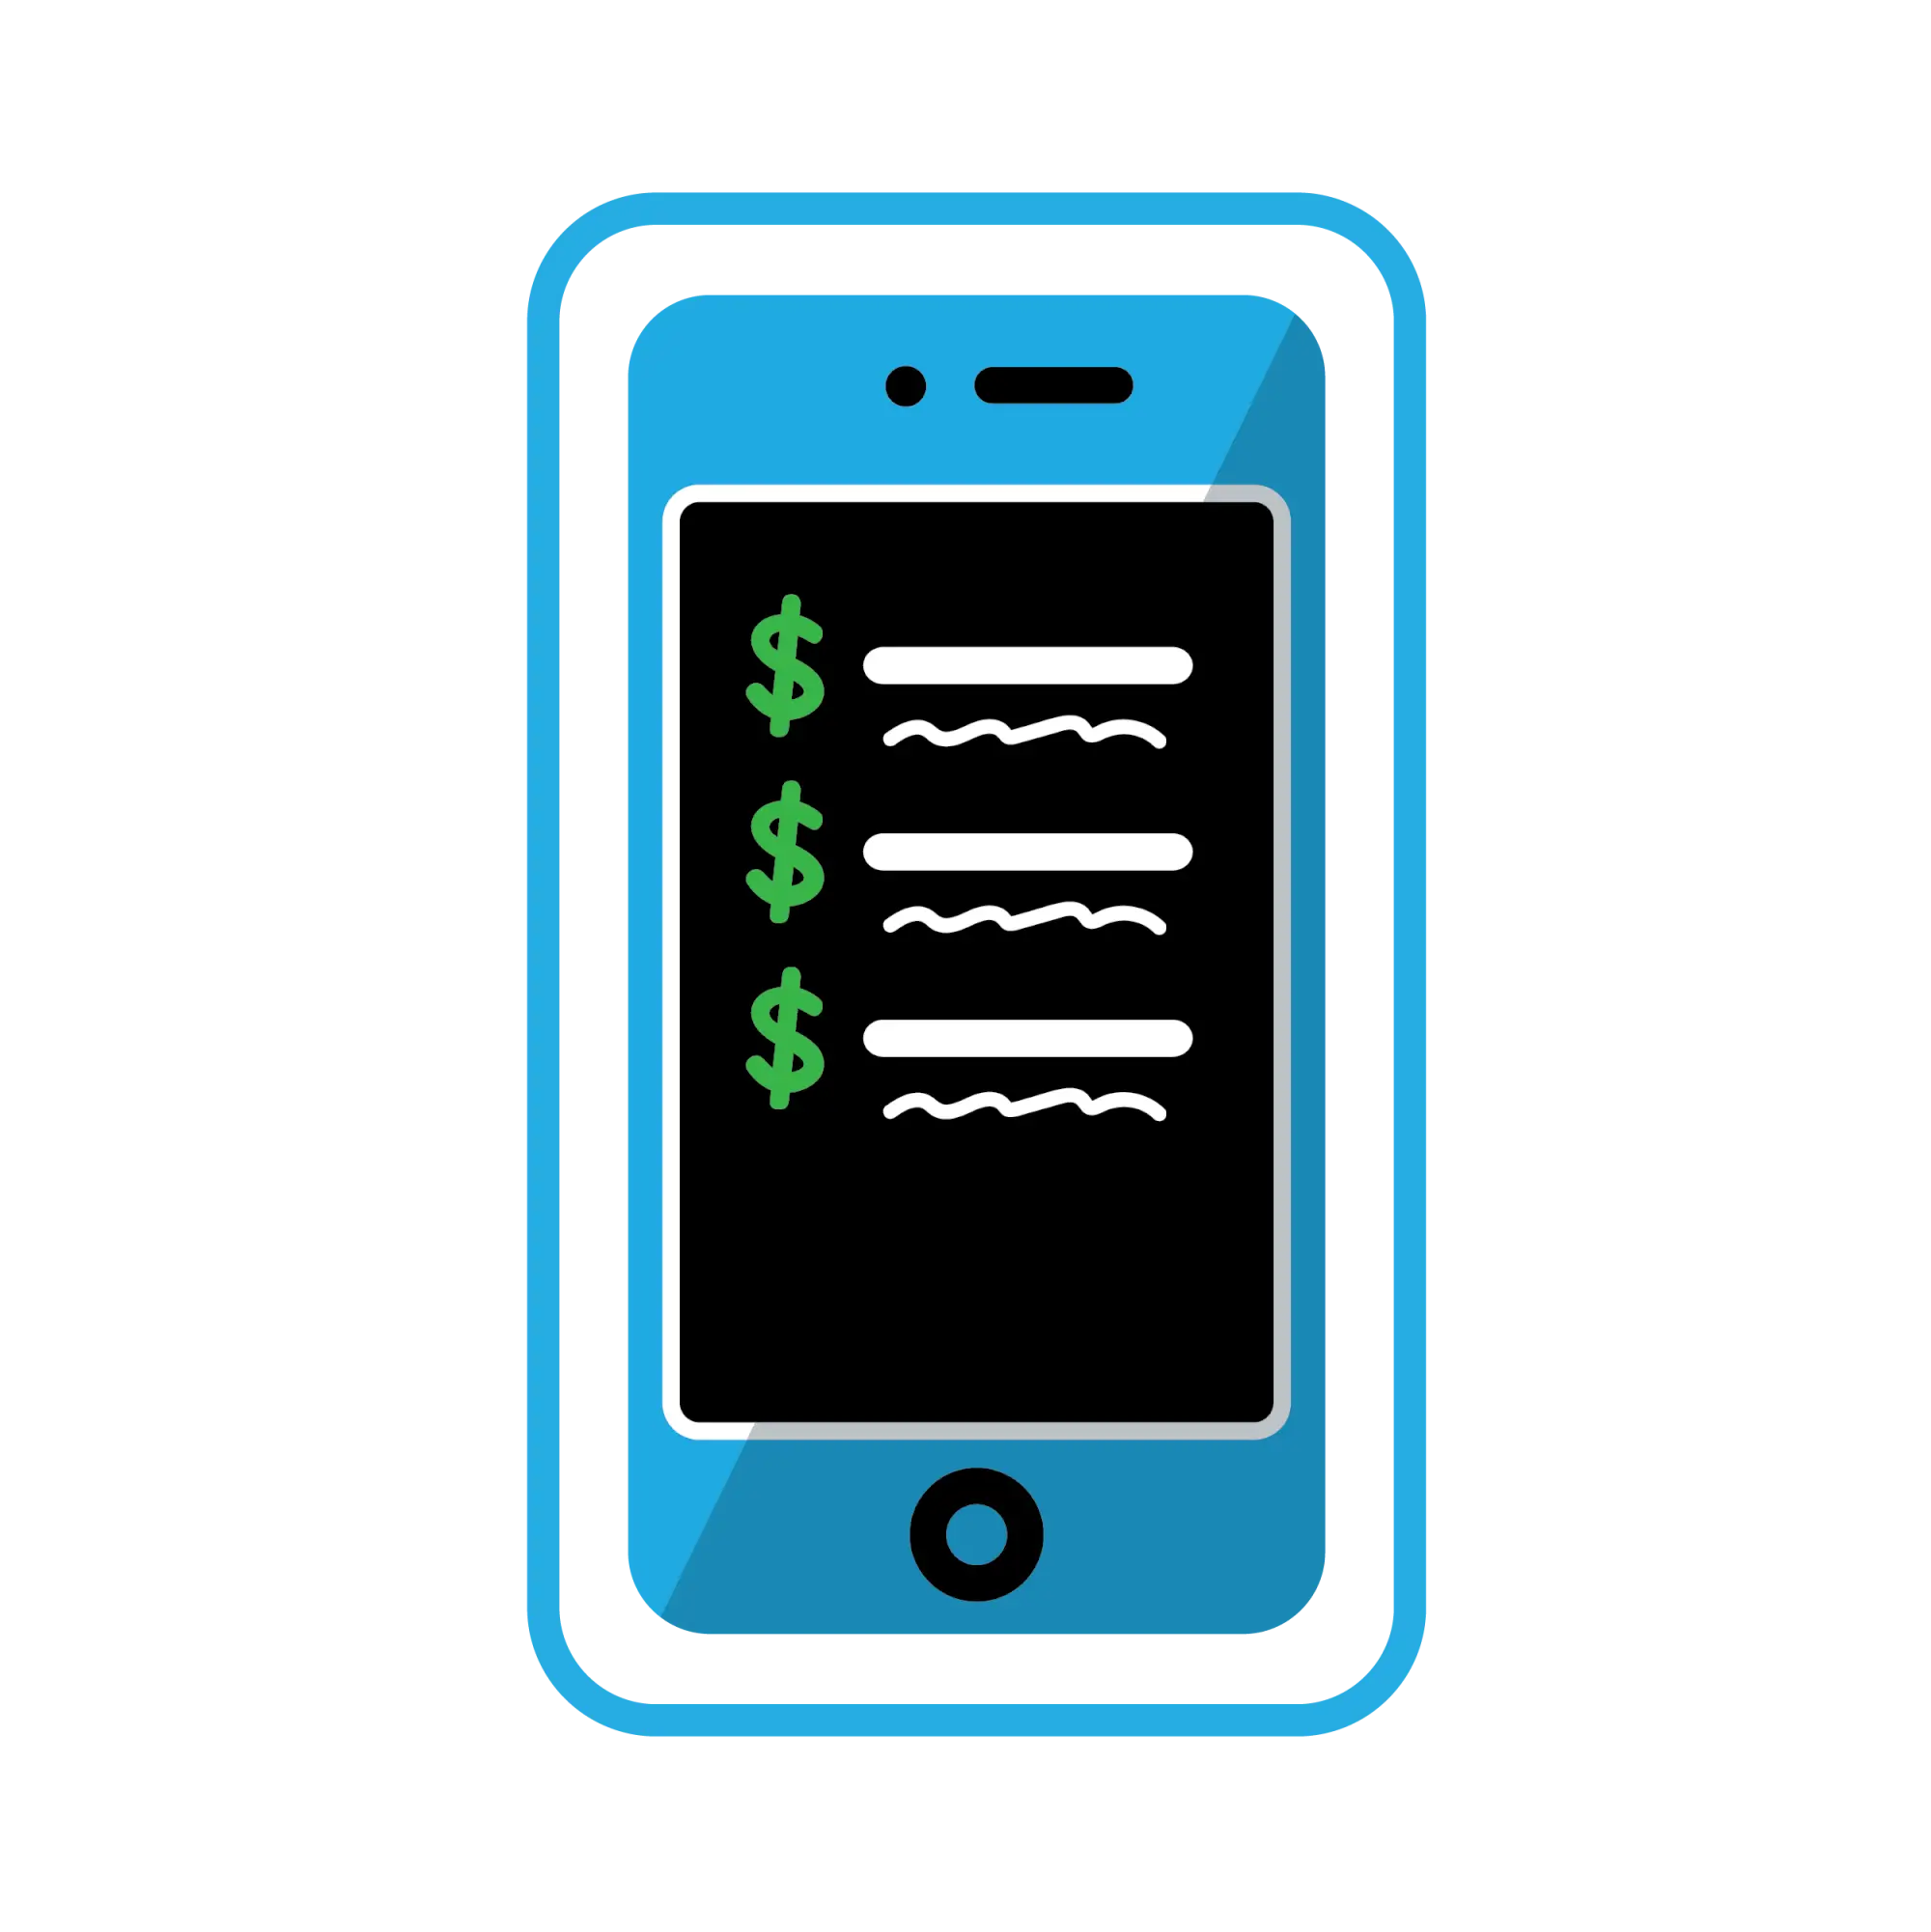 Blue cell phone with payment lines icon